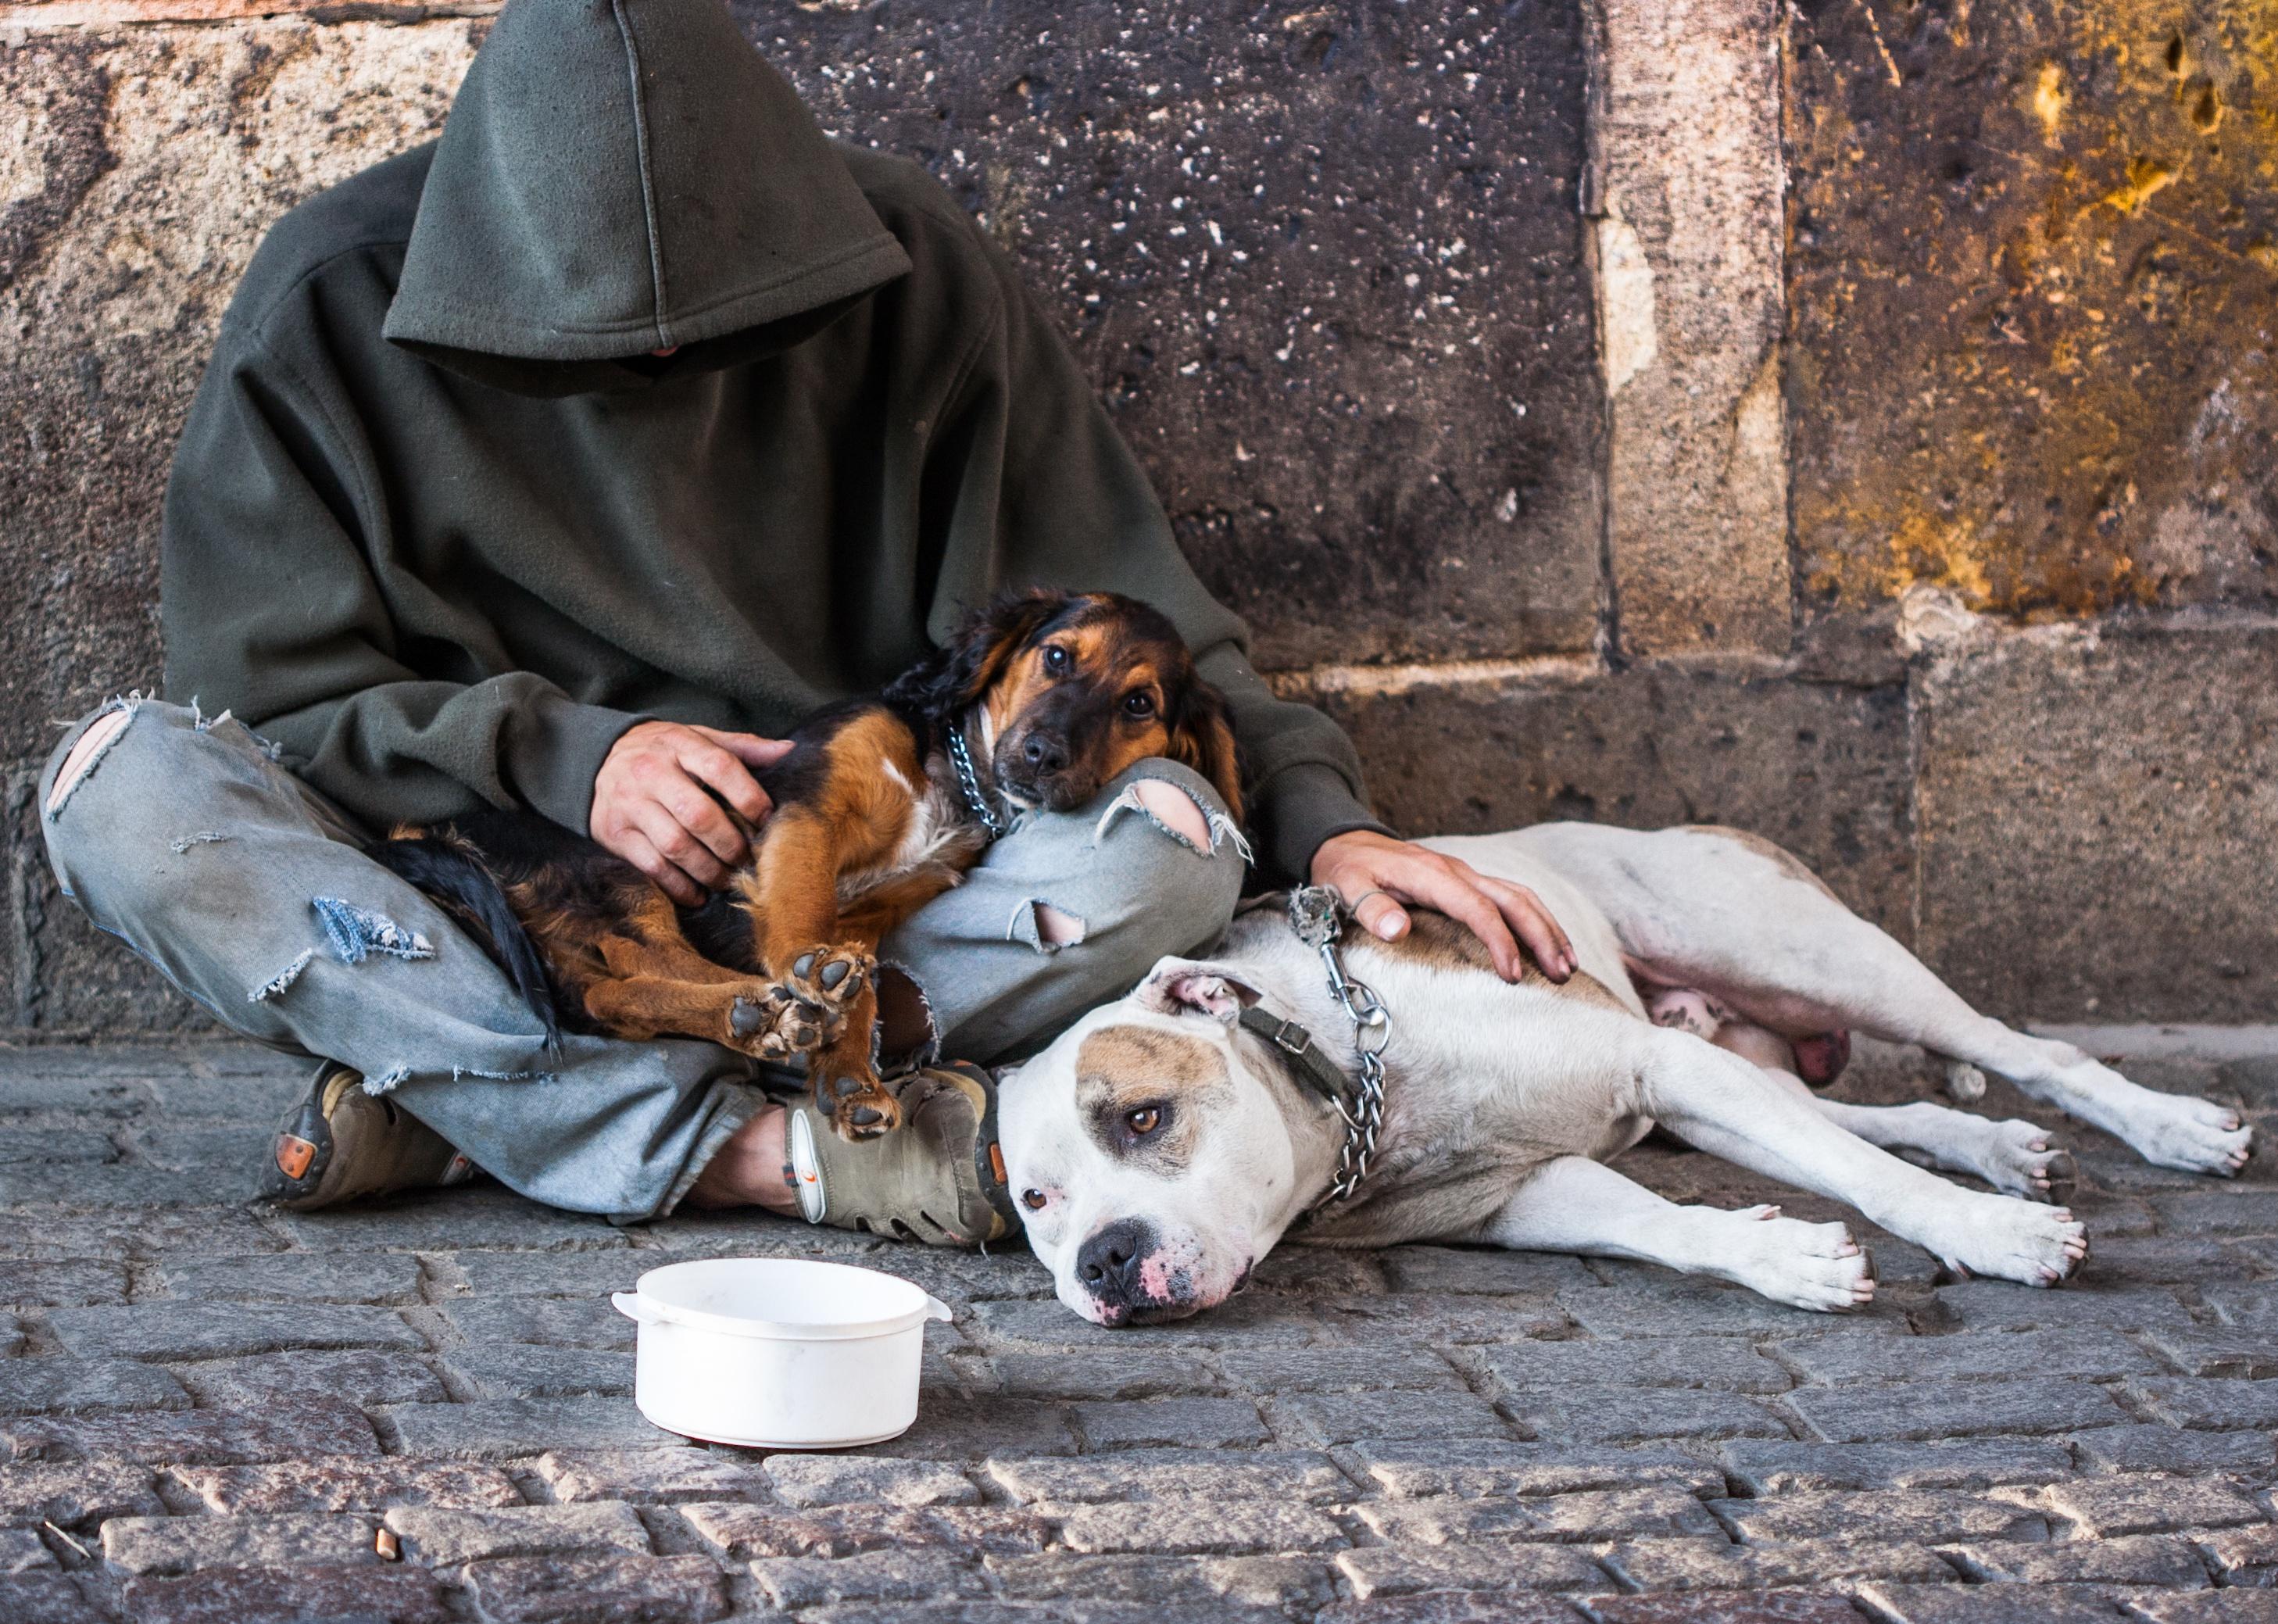 Homeless man with two dogs on the street.